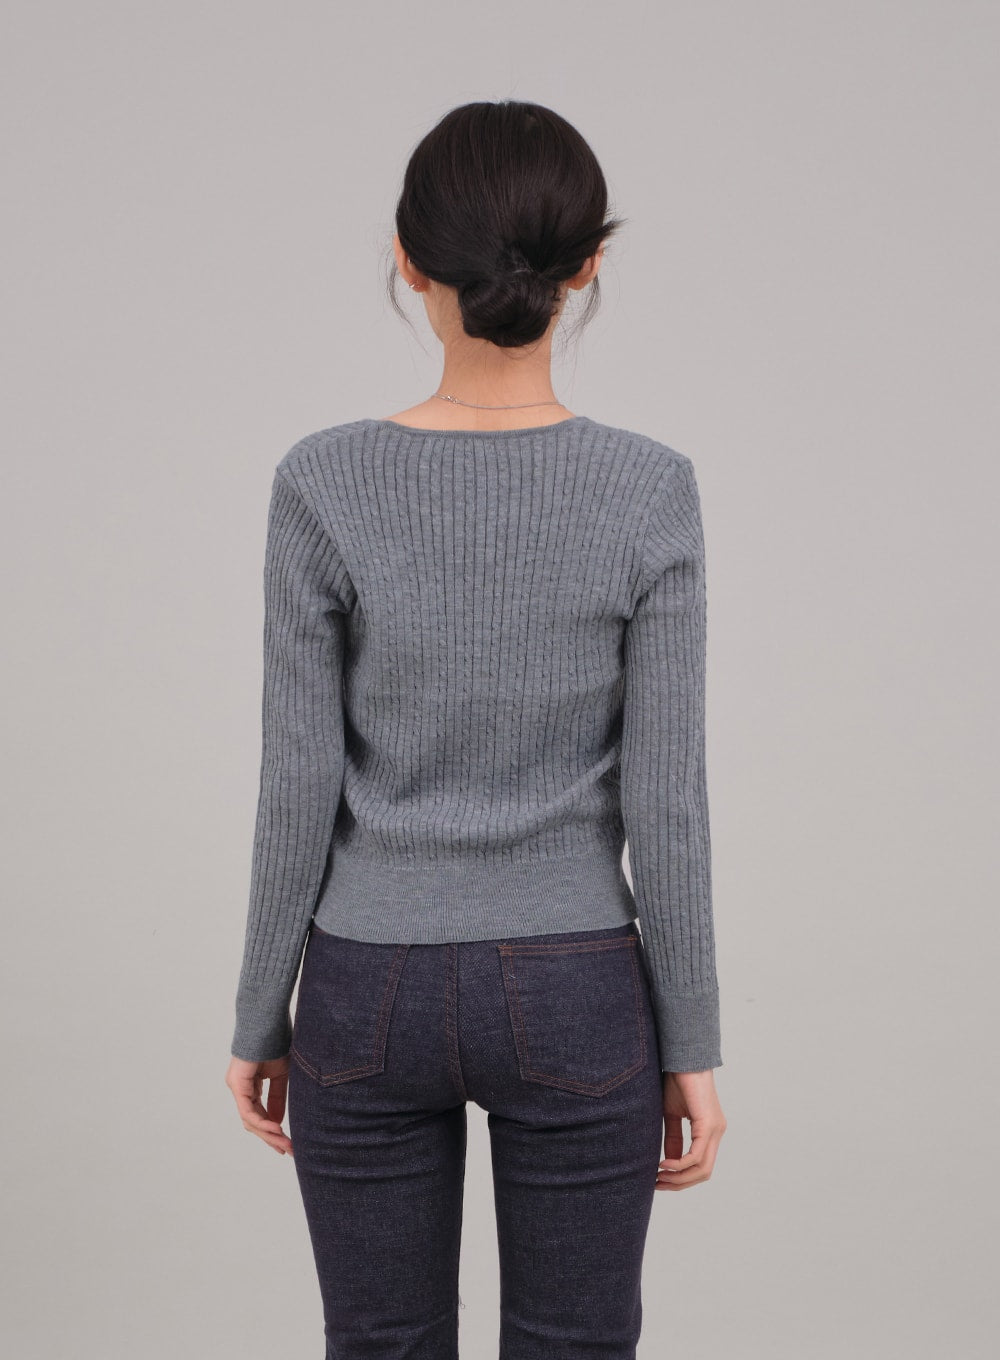 V Neck Cable Knit Top C2701